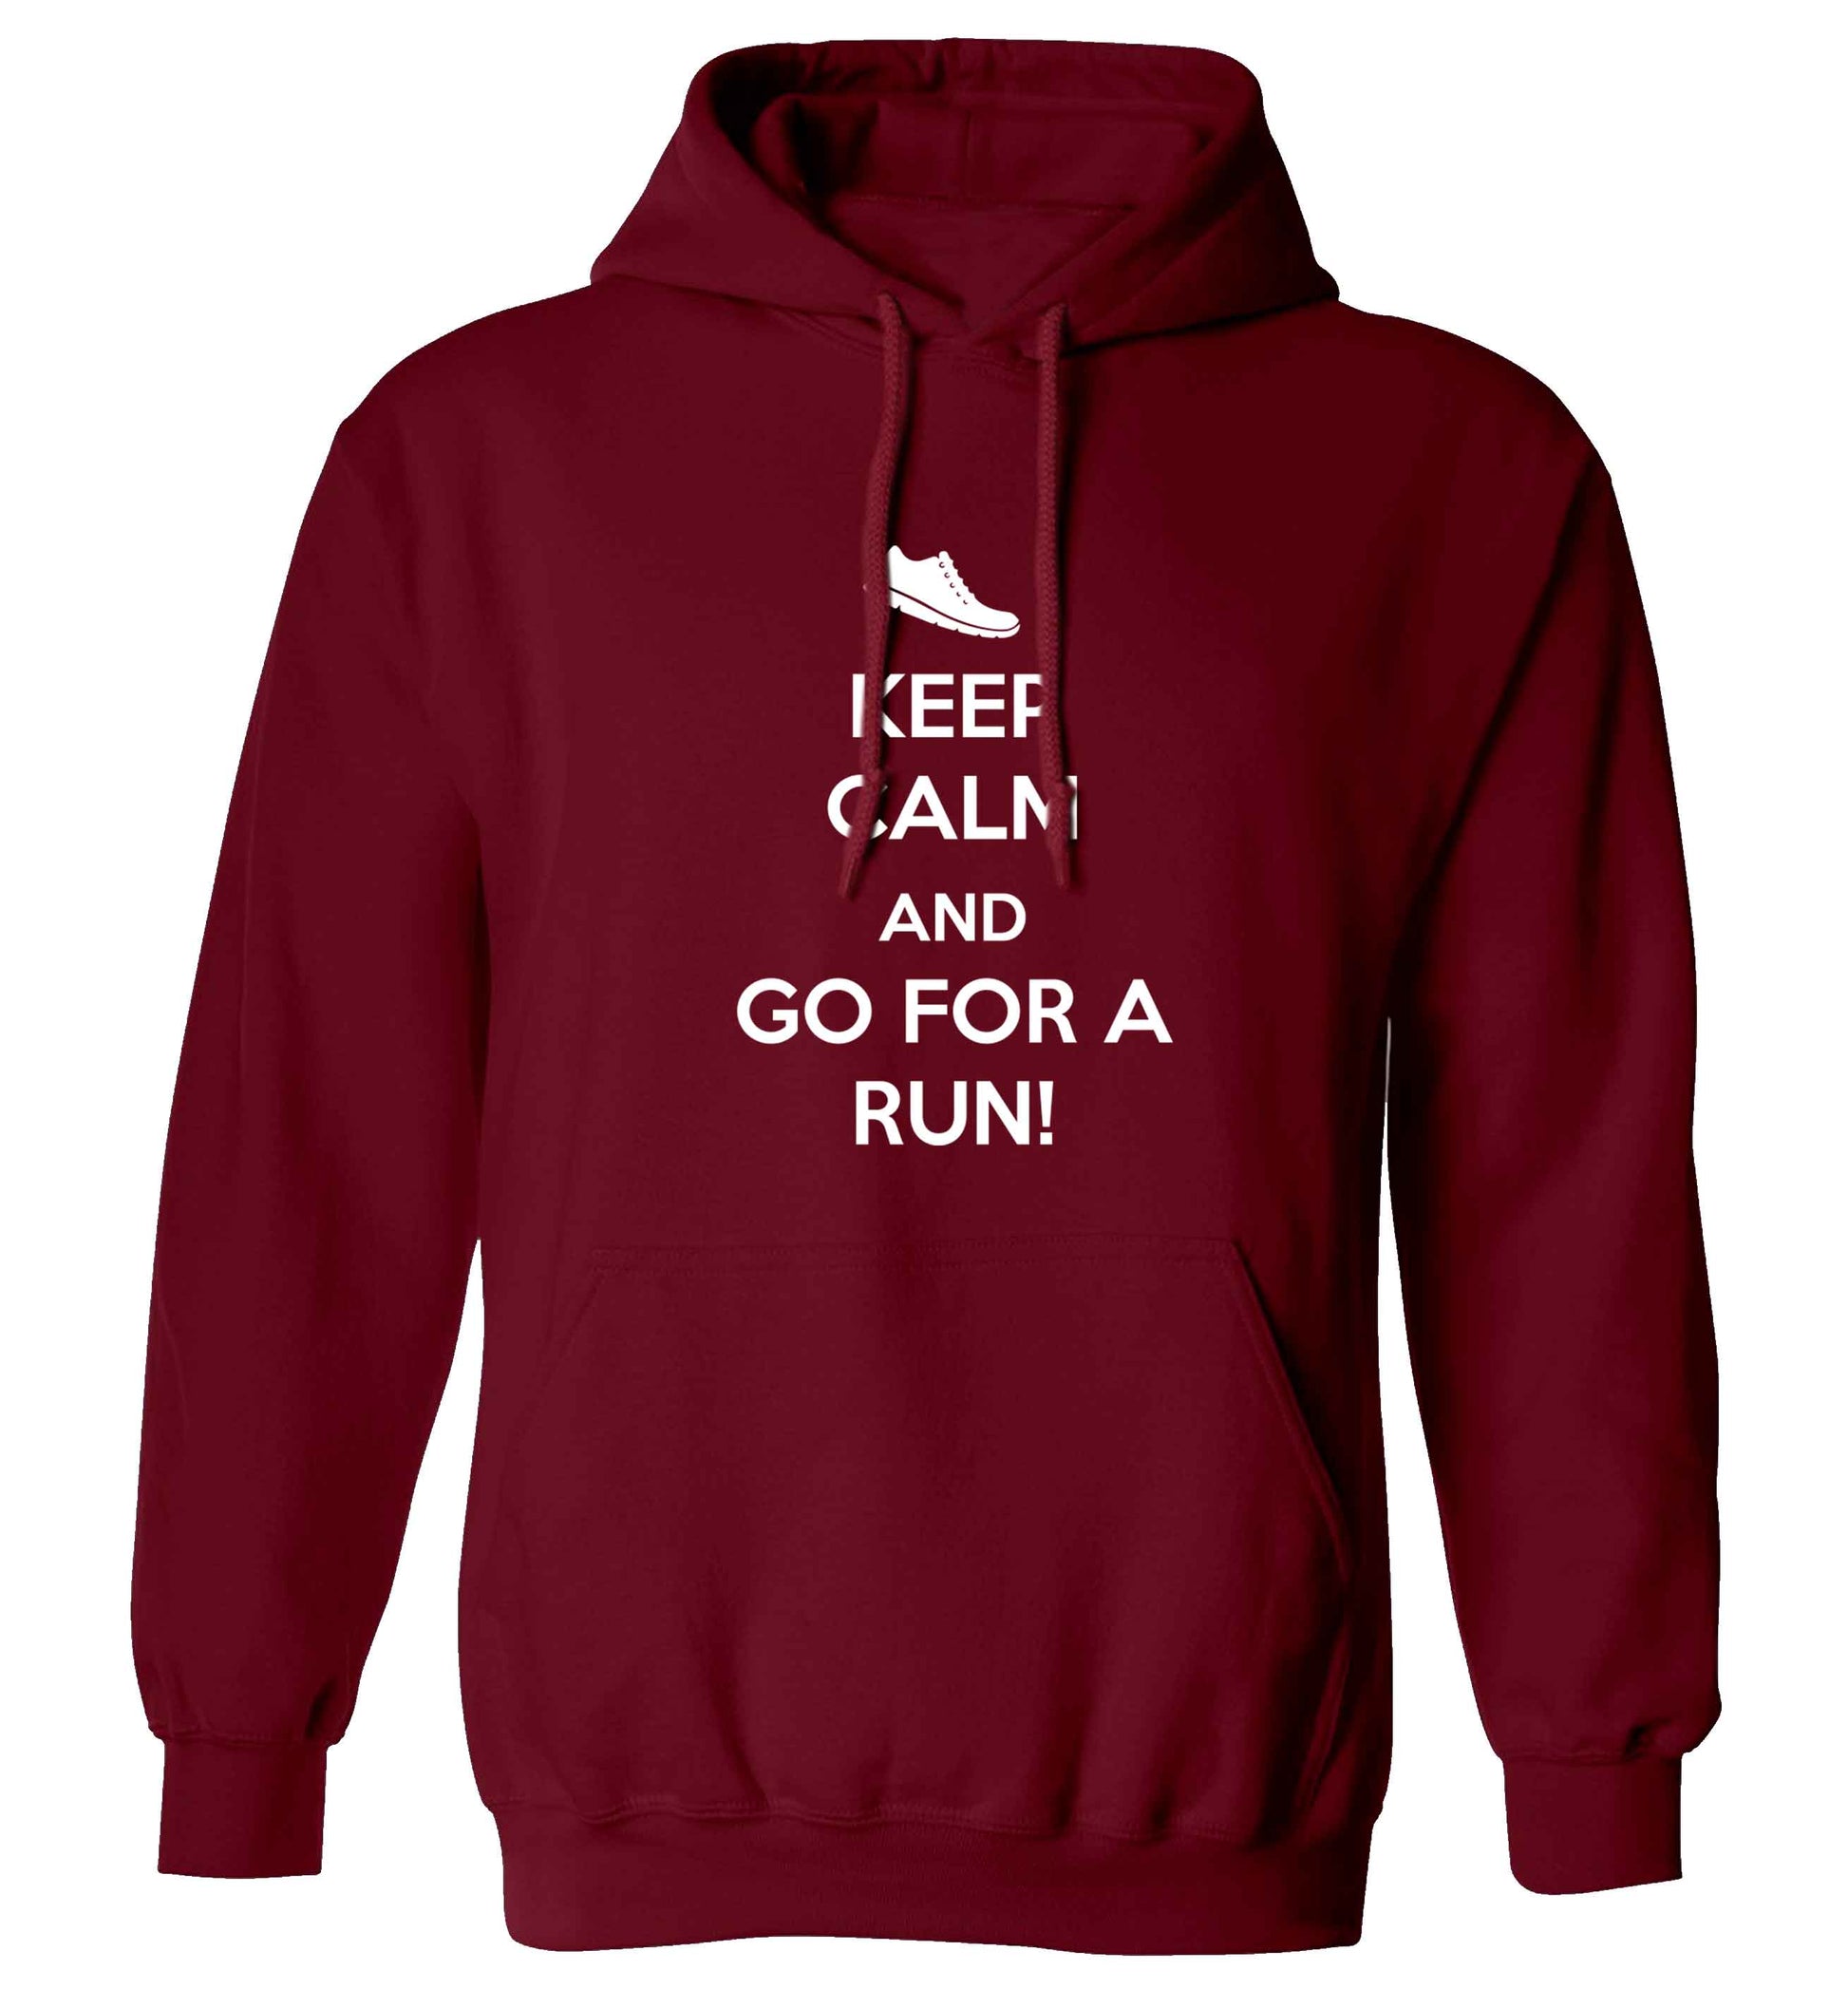 Keep calm and go for a run adults unisex maroon hoodie 2XL